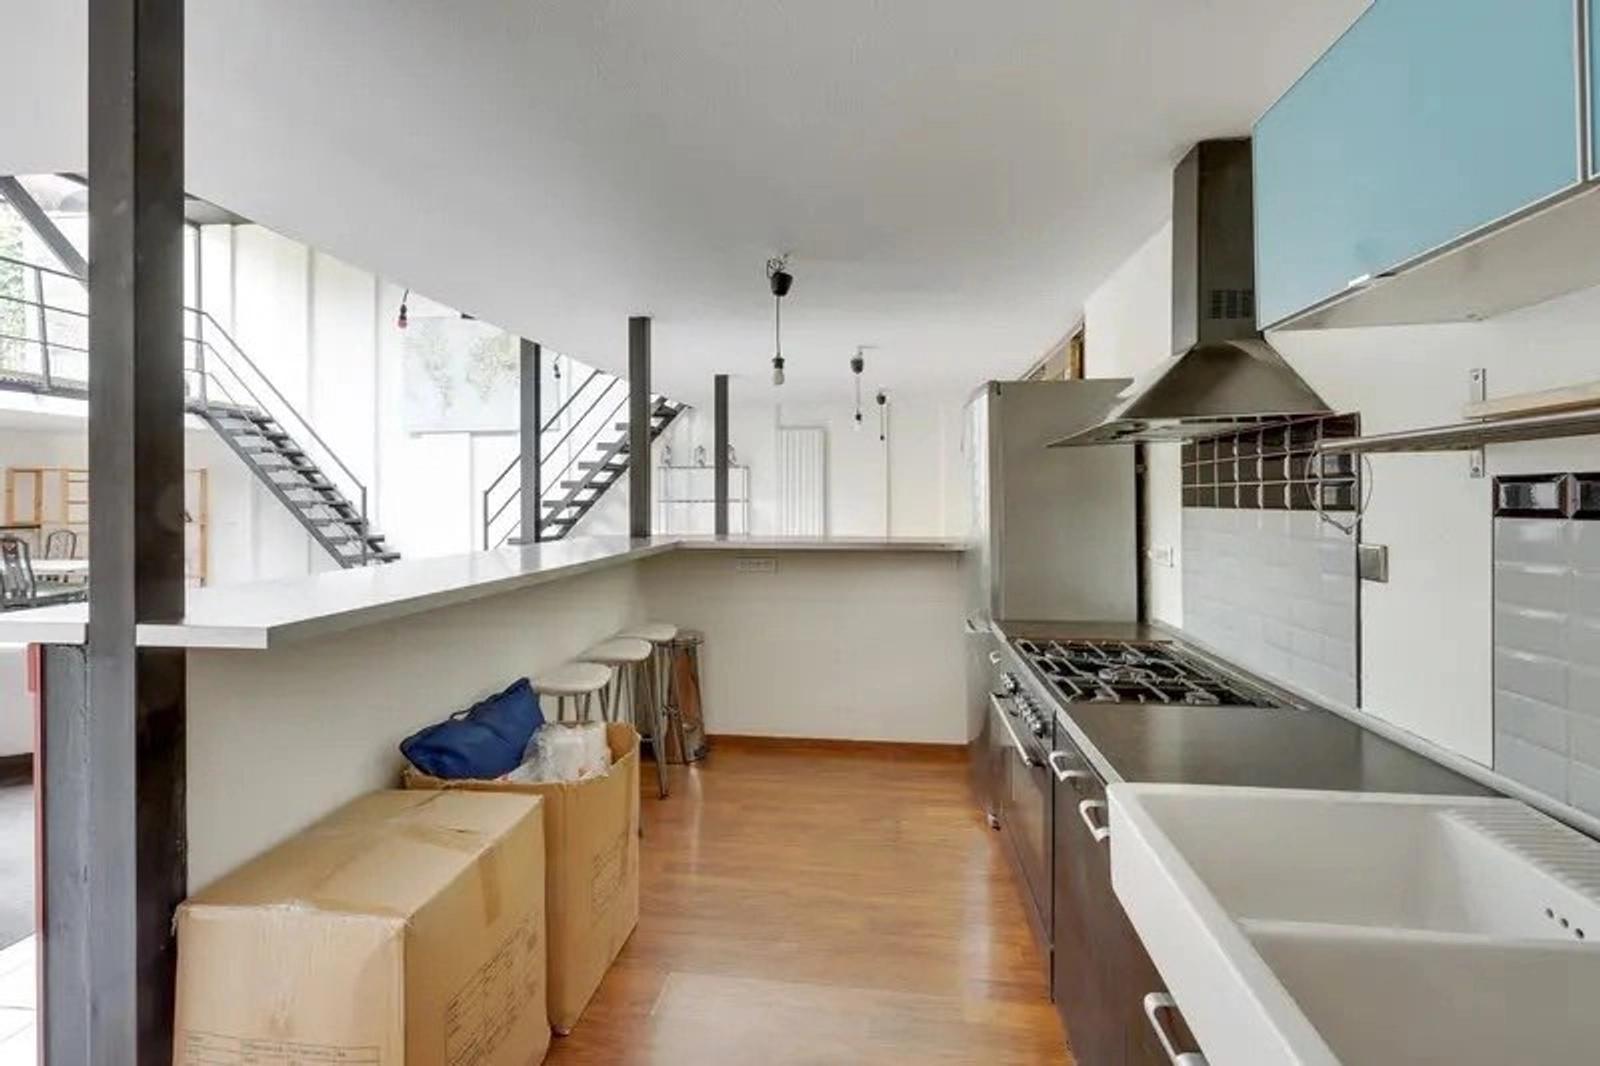 Kitchen in Atypical Loft, Design and Bright 236m ². - 4